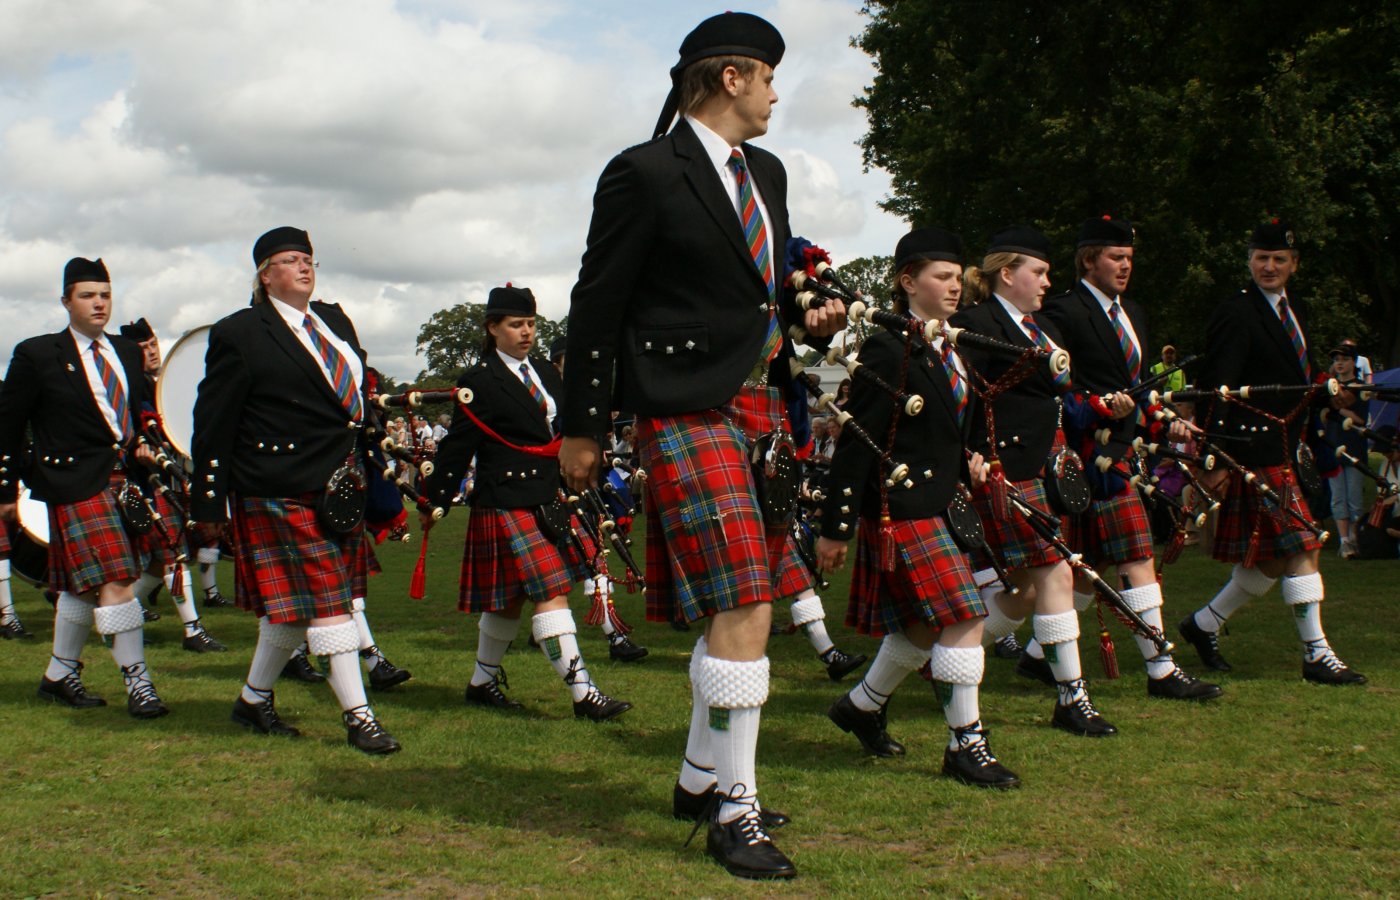 [Photograph+Pipe+Bands+On+The+March+Perth+Scotland.jpg]